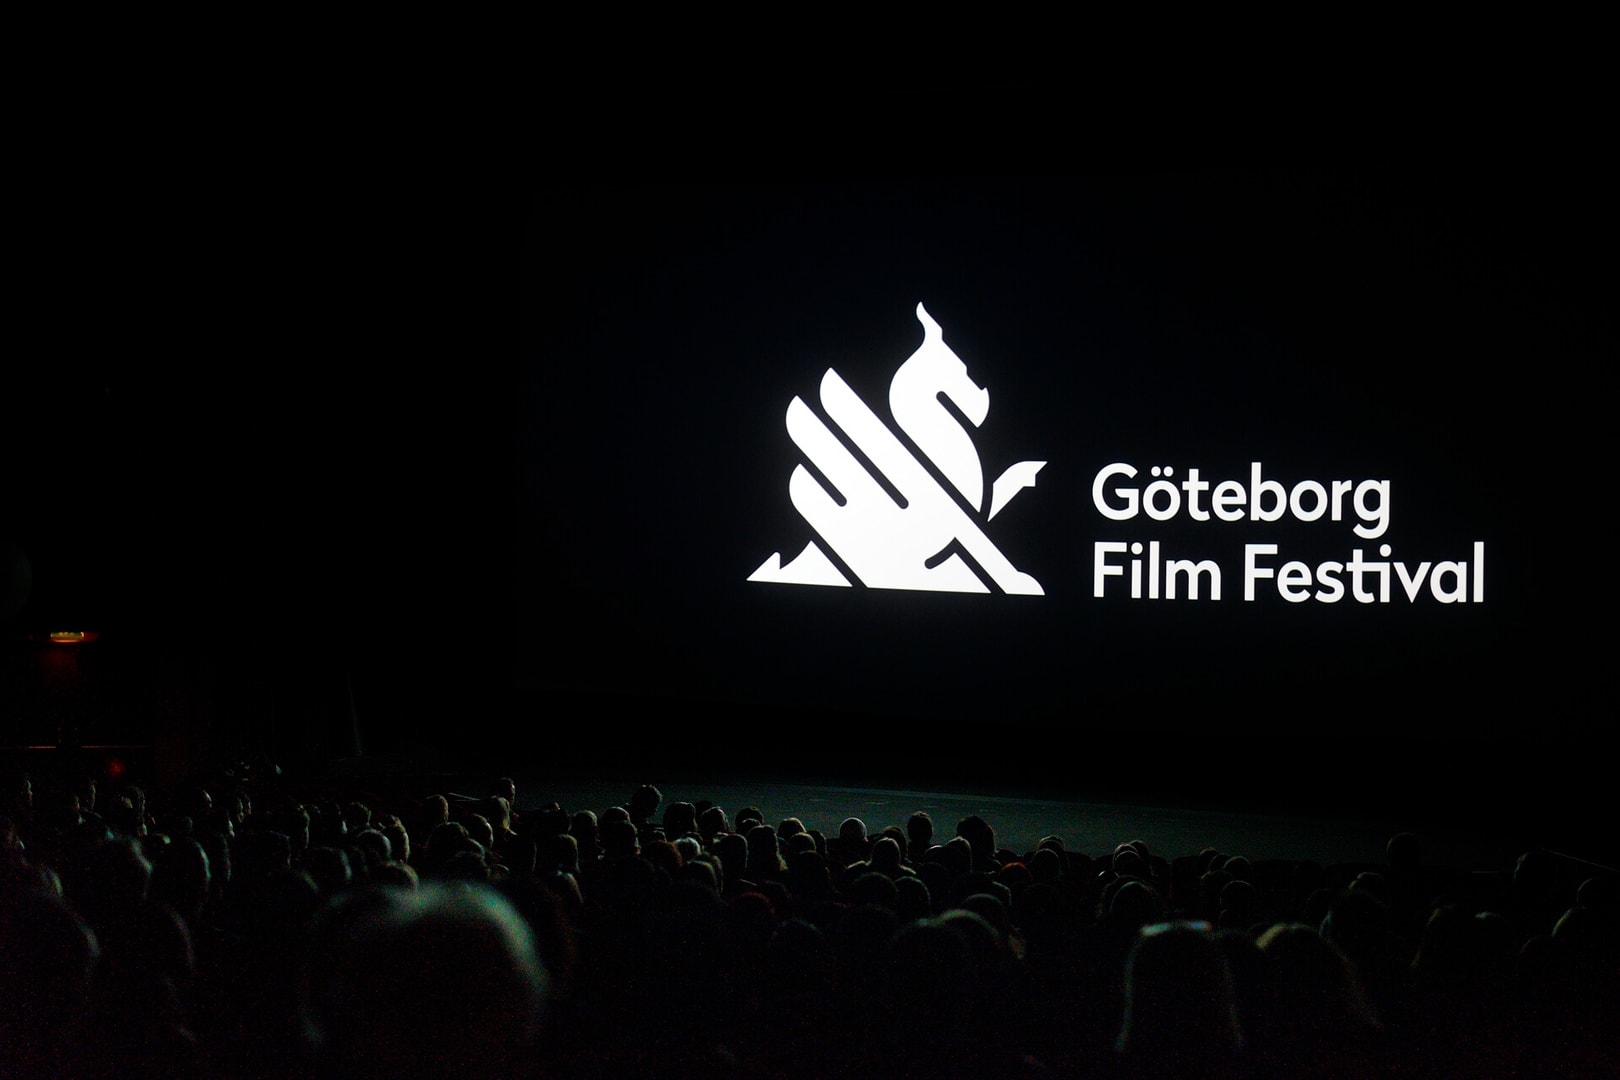 Göteborg Film Festival Invites One Person For 7-Day’s Of Film Retreat At A Swedish Island - Film Festival News - Indie Shorts Mag